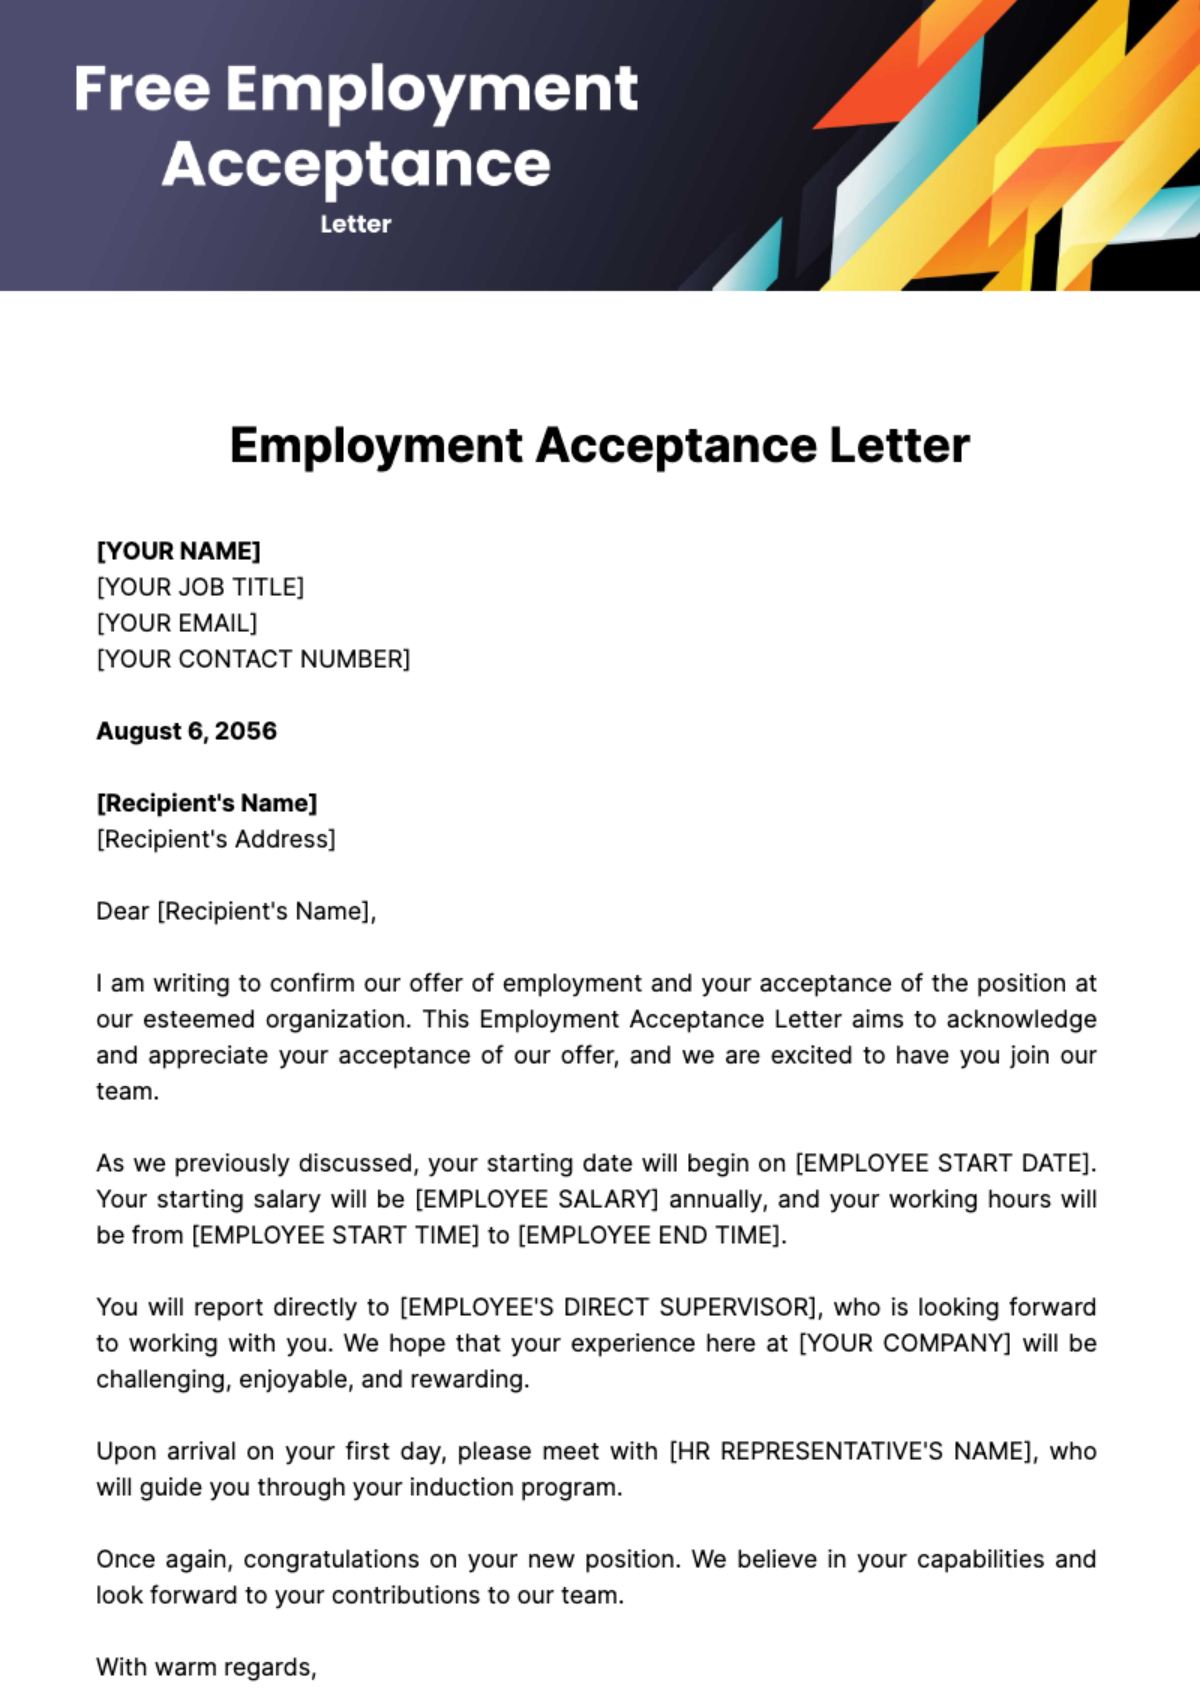 Free Employment Acceptance Letter Template